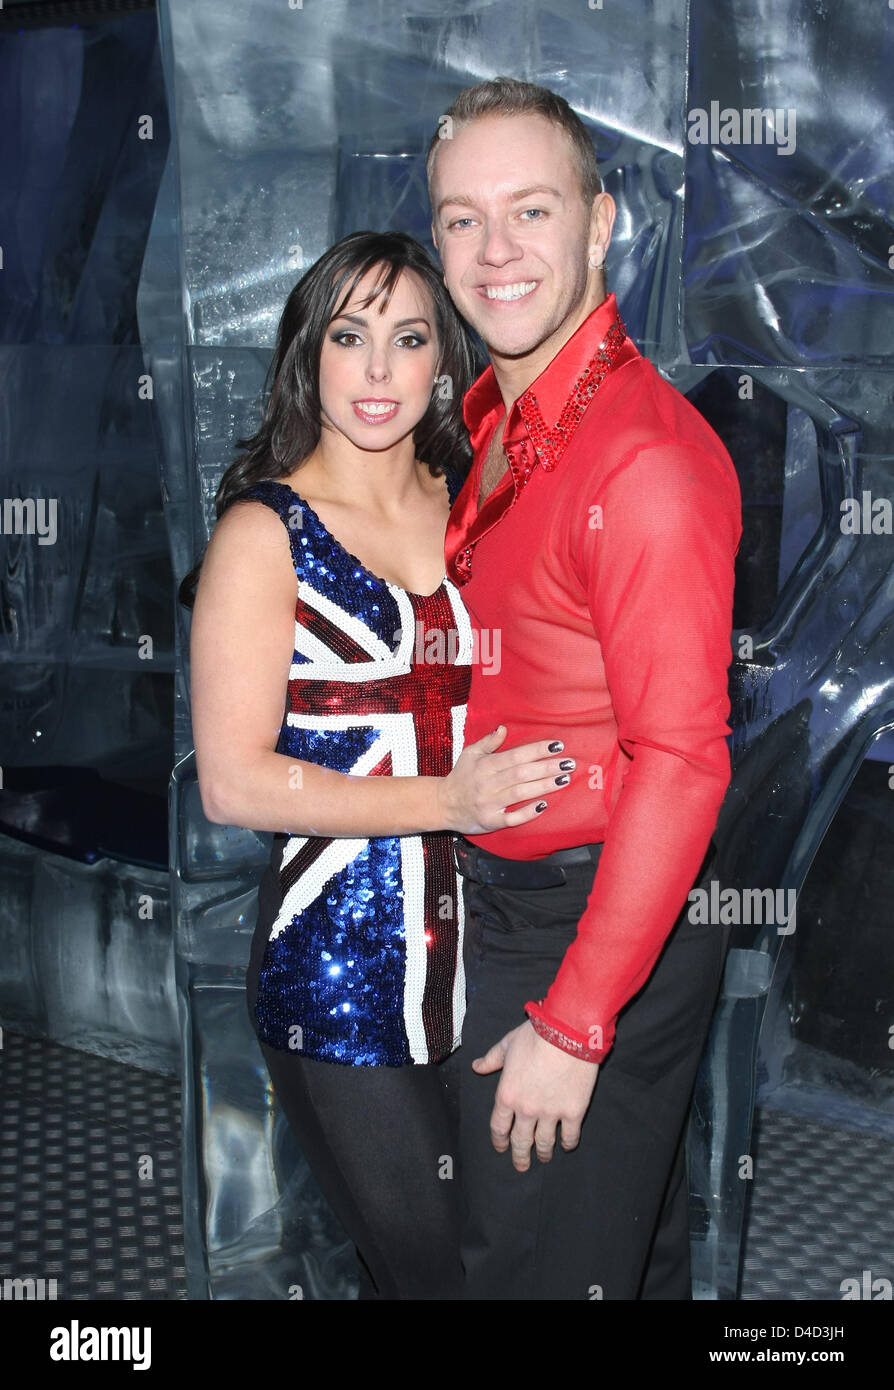 BETH TWEDDLE & DAN WHISTON CELEBRATIES ON ICE PHOTOCALL FOR UPCOMING TOUR ICE BAR BY ICEHOTEL LONDON ENGLAND UK 12 March 201 Stock Photo